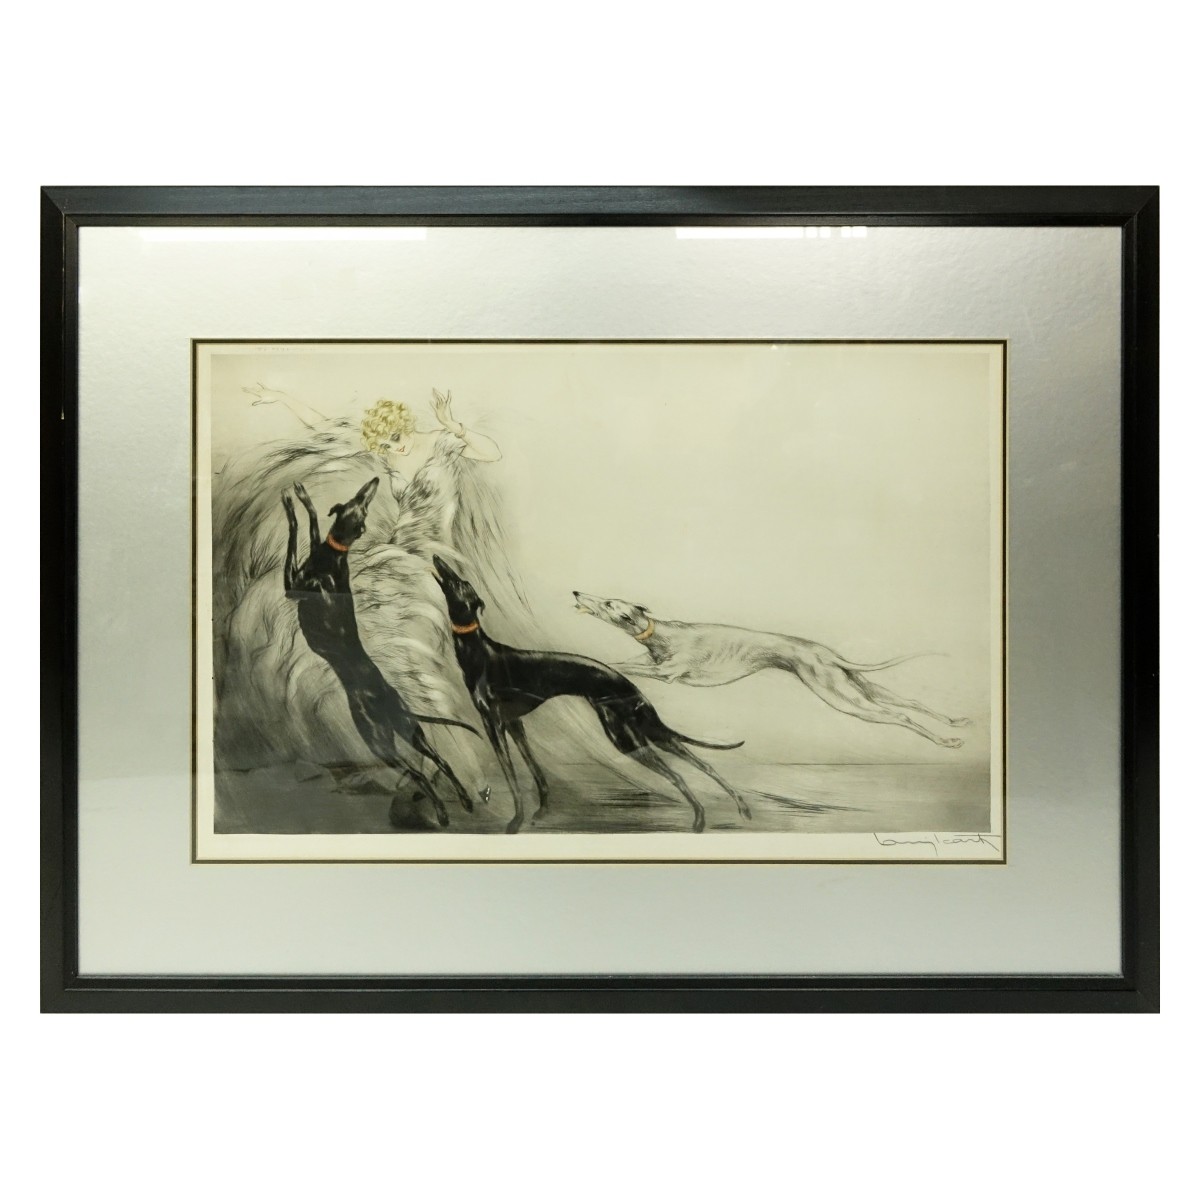 Louis Icart, French (1888 - 1950) Drypoint Etching